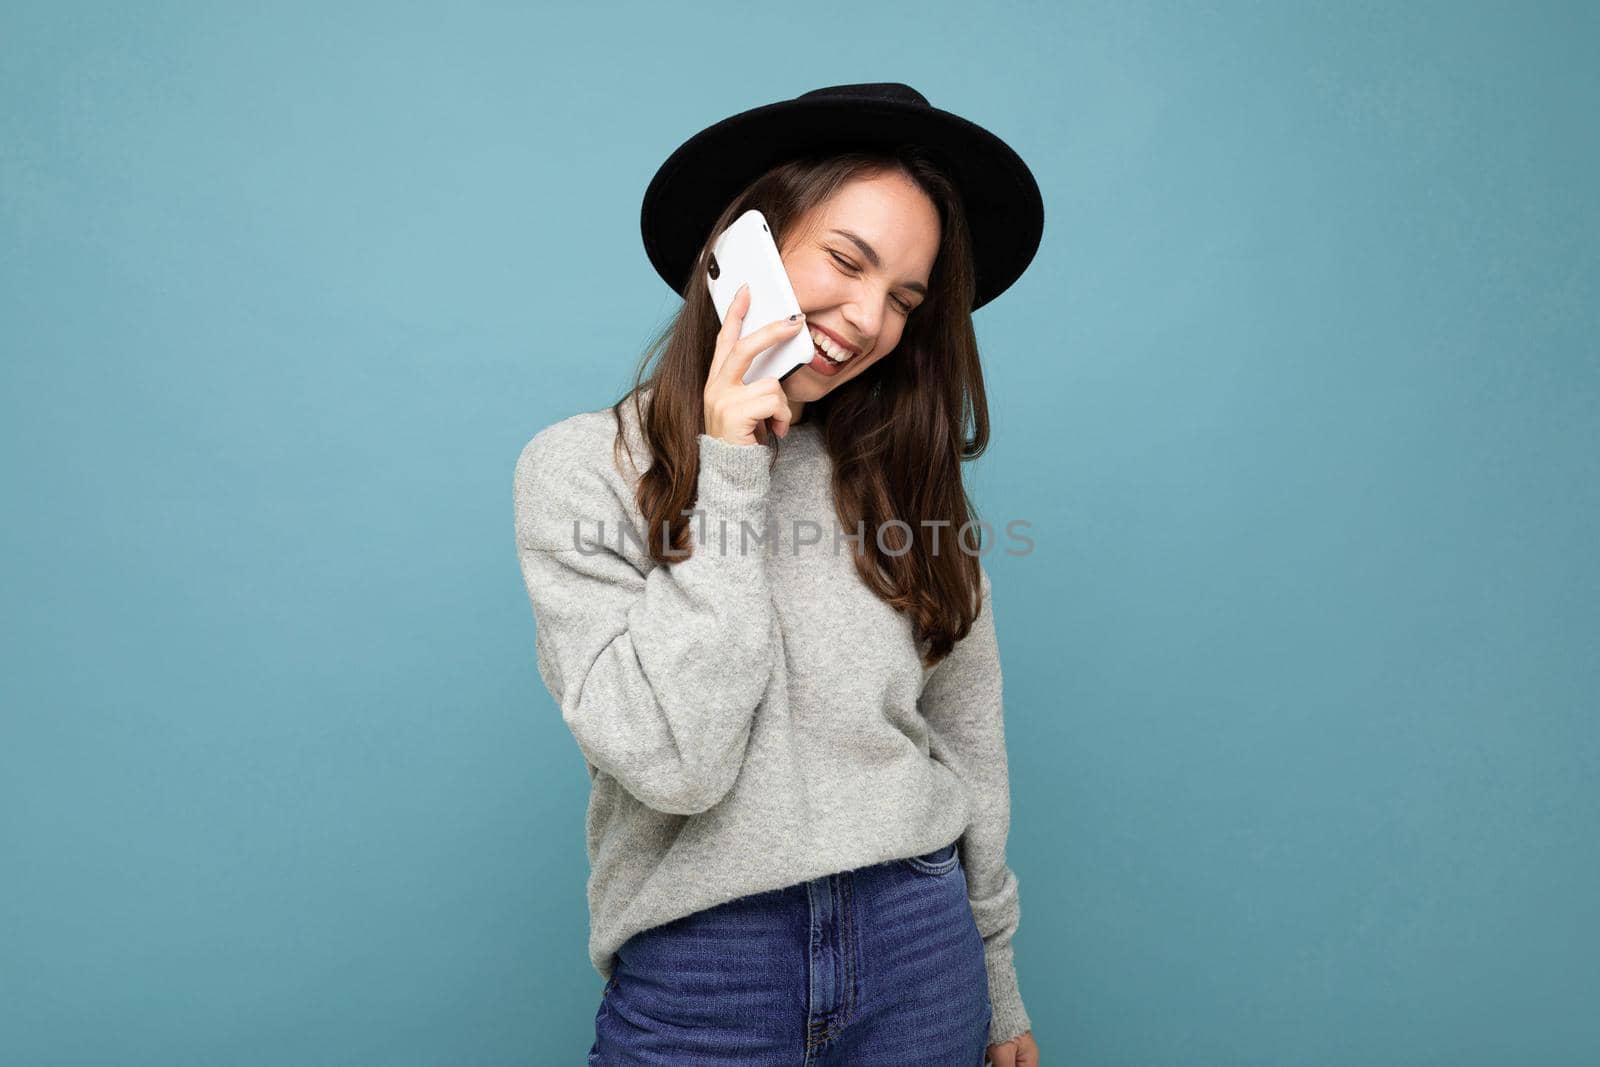 a young girl in a hat speaks on the phone against a blue wall.